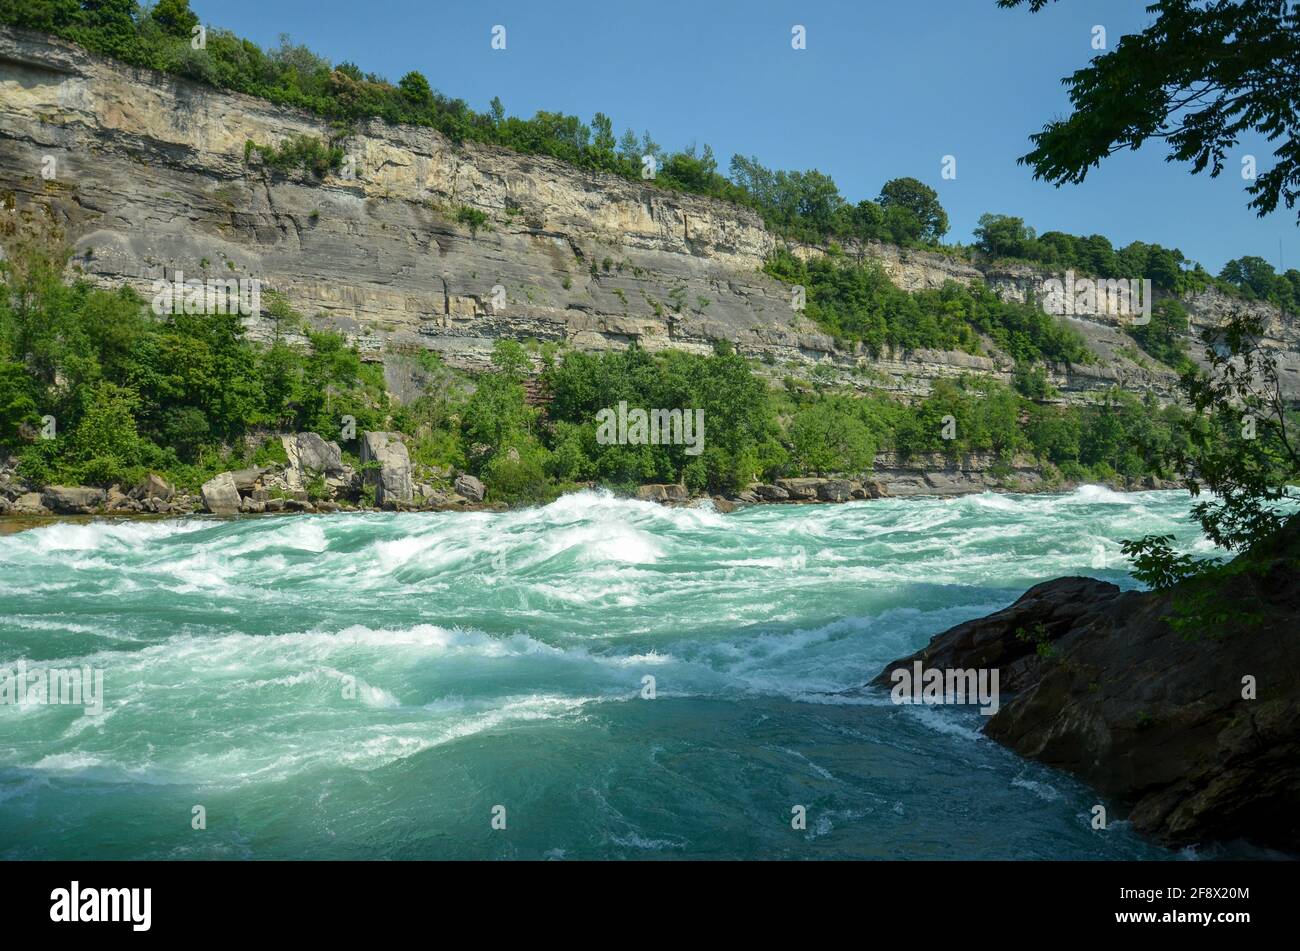 Bubbling rapids of Niagara River flowing over stones and rocks with forest and rock face in the background in sunny weather Stock Photo